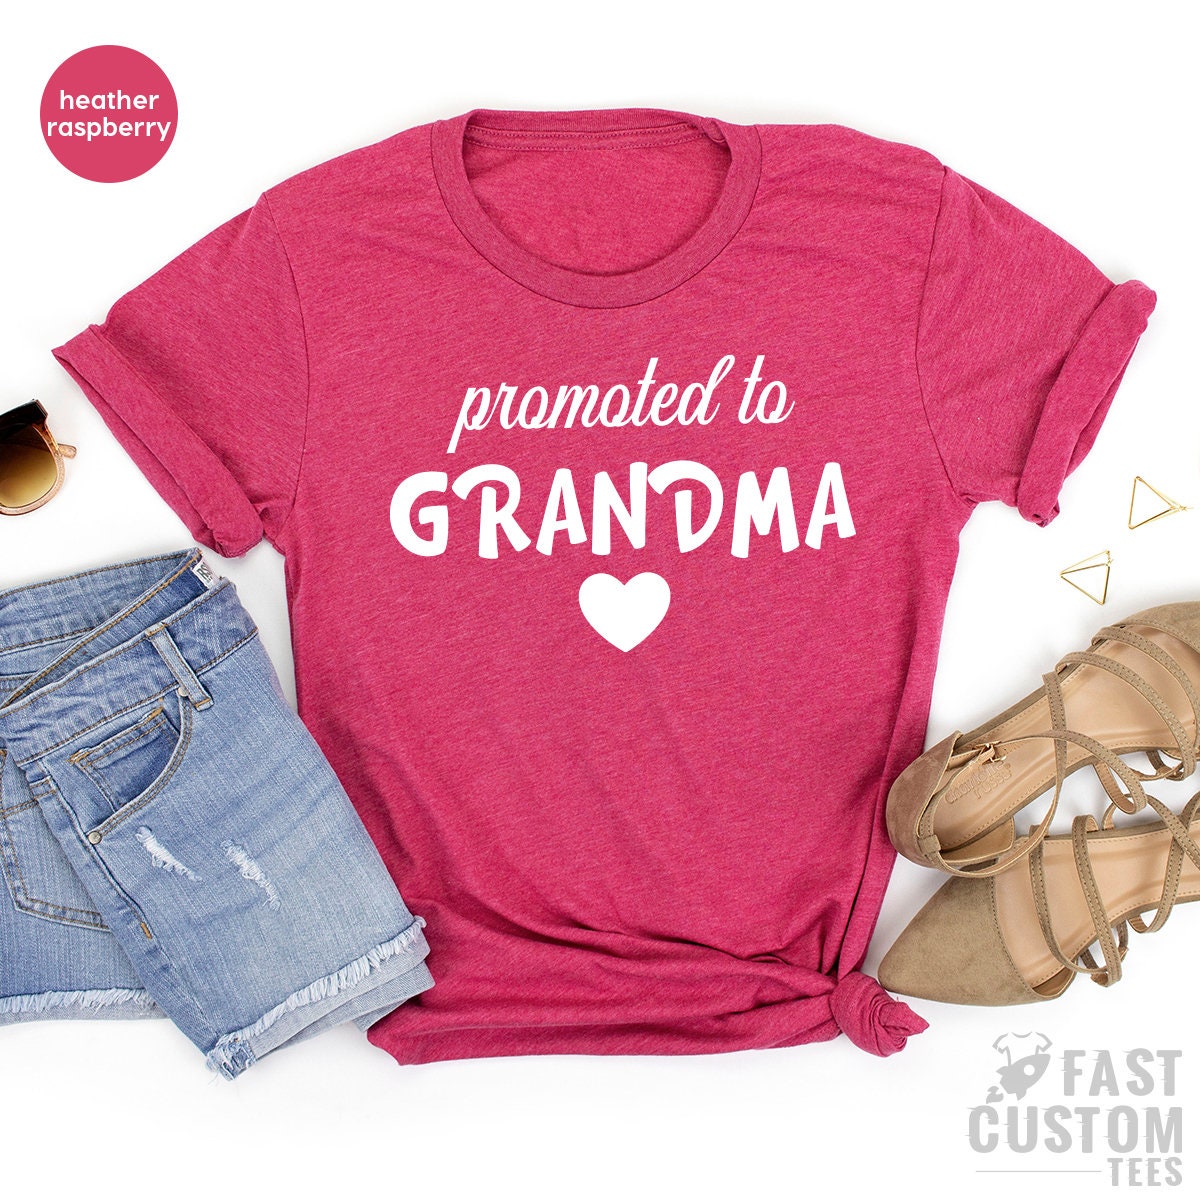 Baby Announcement Tee, Promoted To Grandma Shirt, New Grandma Gift, New Grandparets Tee, New Grandma Shirt, Best Grandma Shirts, Grandma Tee - Fastdeliverytees.com